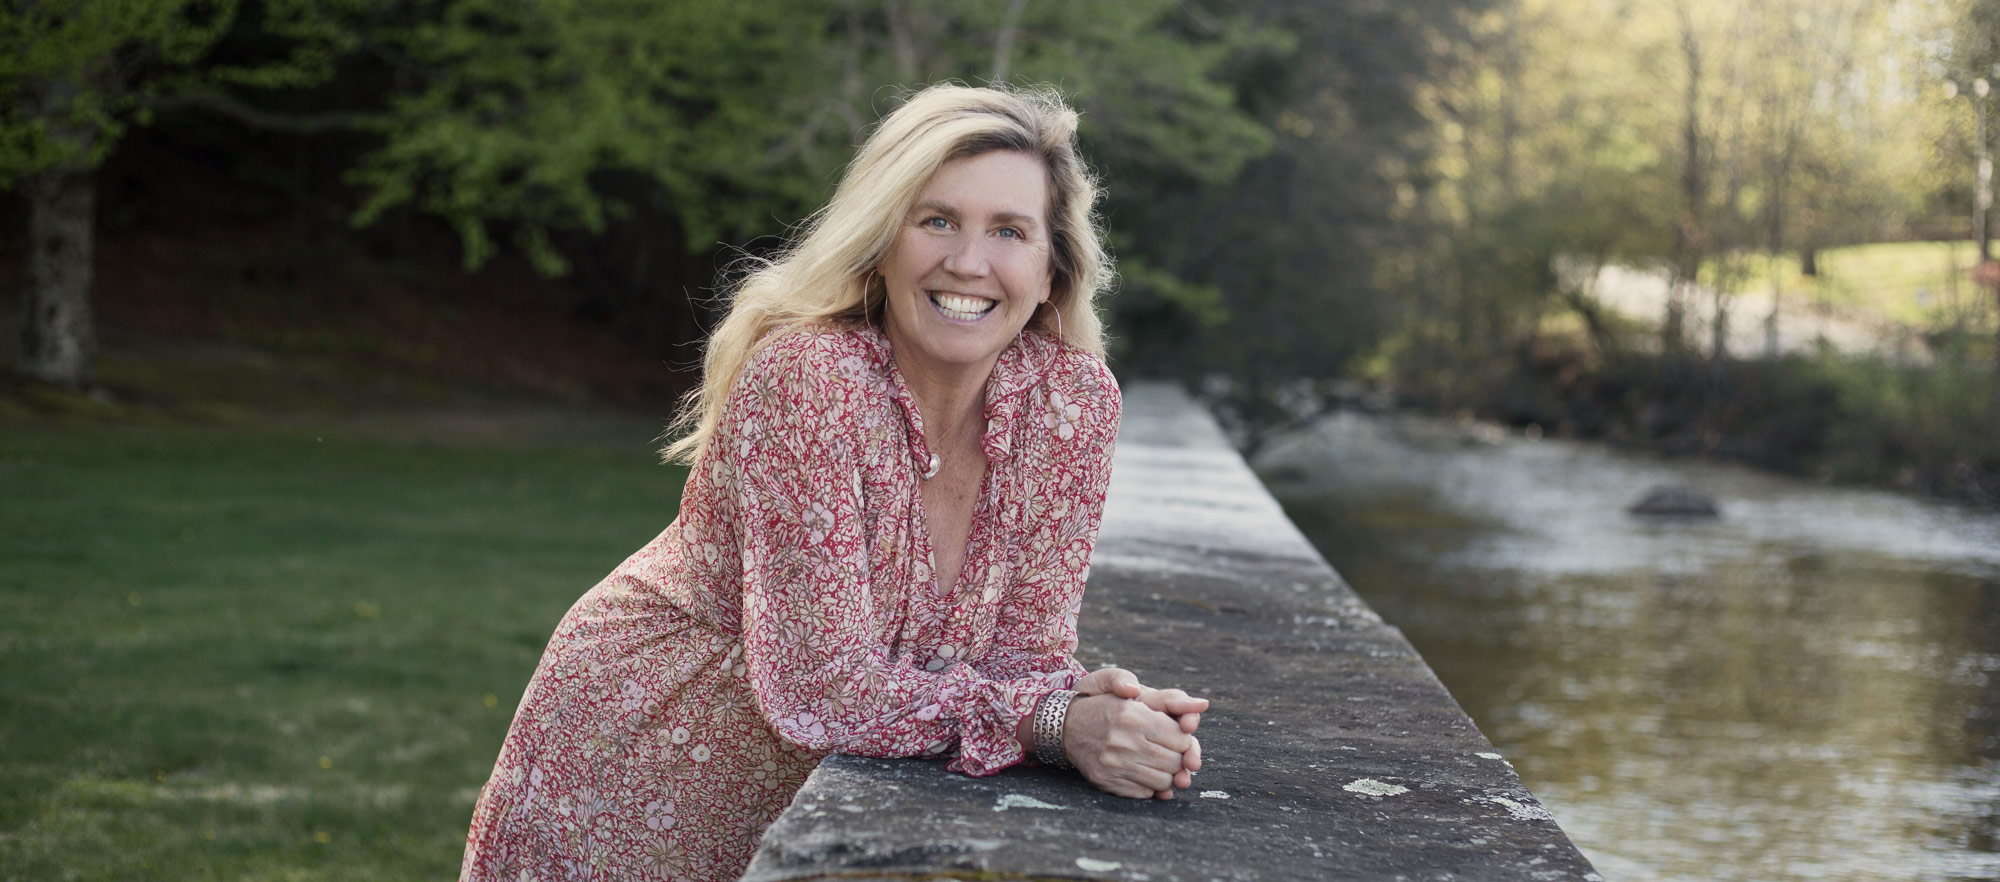 Kasey Mathews smiling wide while leaning over the edge of a stone barrier. On the other side of the stone barrier is a river. Kasey is wearing a red floral dress with long ruffled sleeves and a silver bracelet